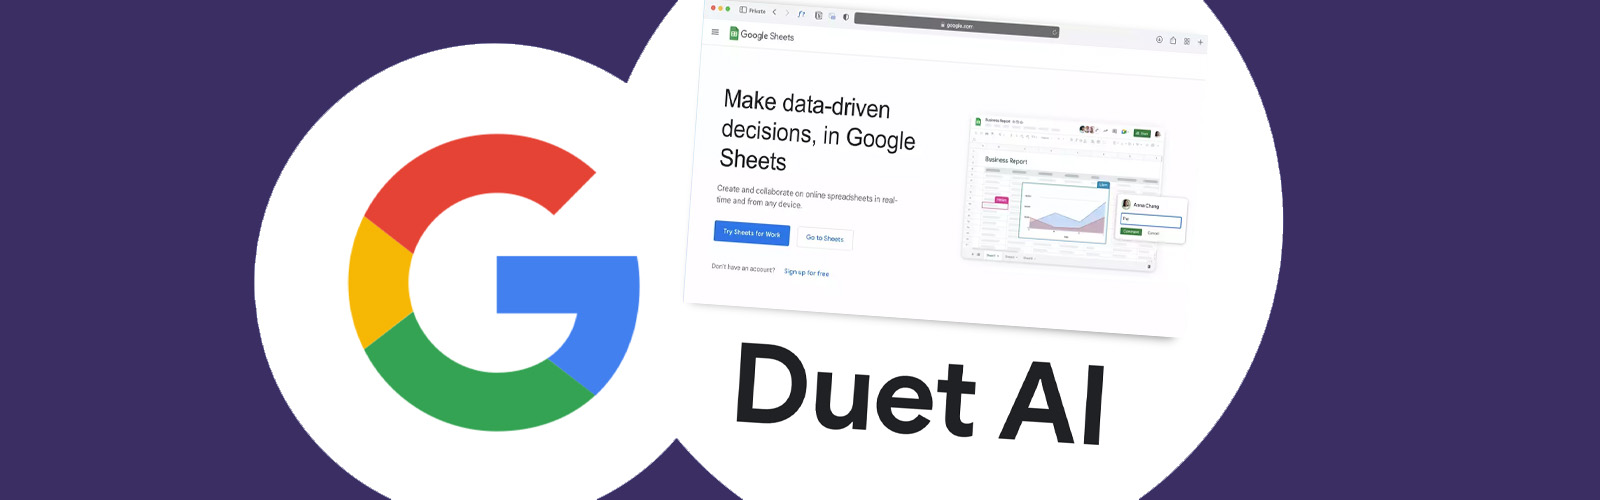 Google Duet AI Logo and Slides Example